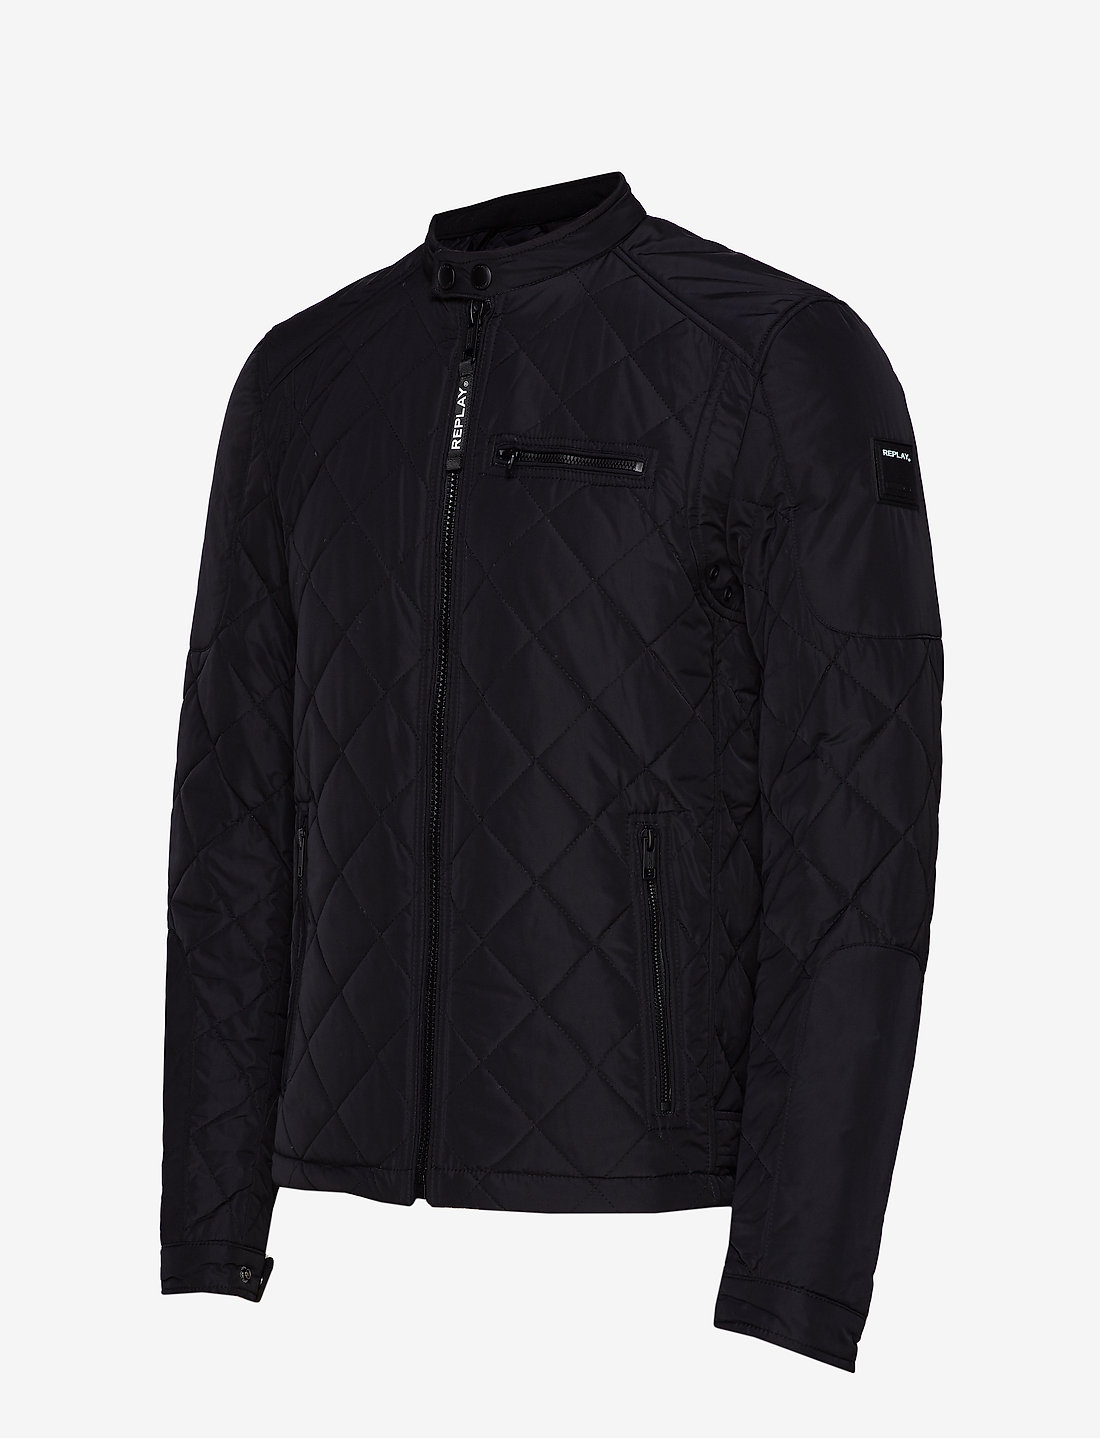 easy Replay - jackets online Boozt.com. Jacket Fast at Replay €. 89.94 Quilted and delivery from returns Buy